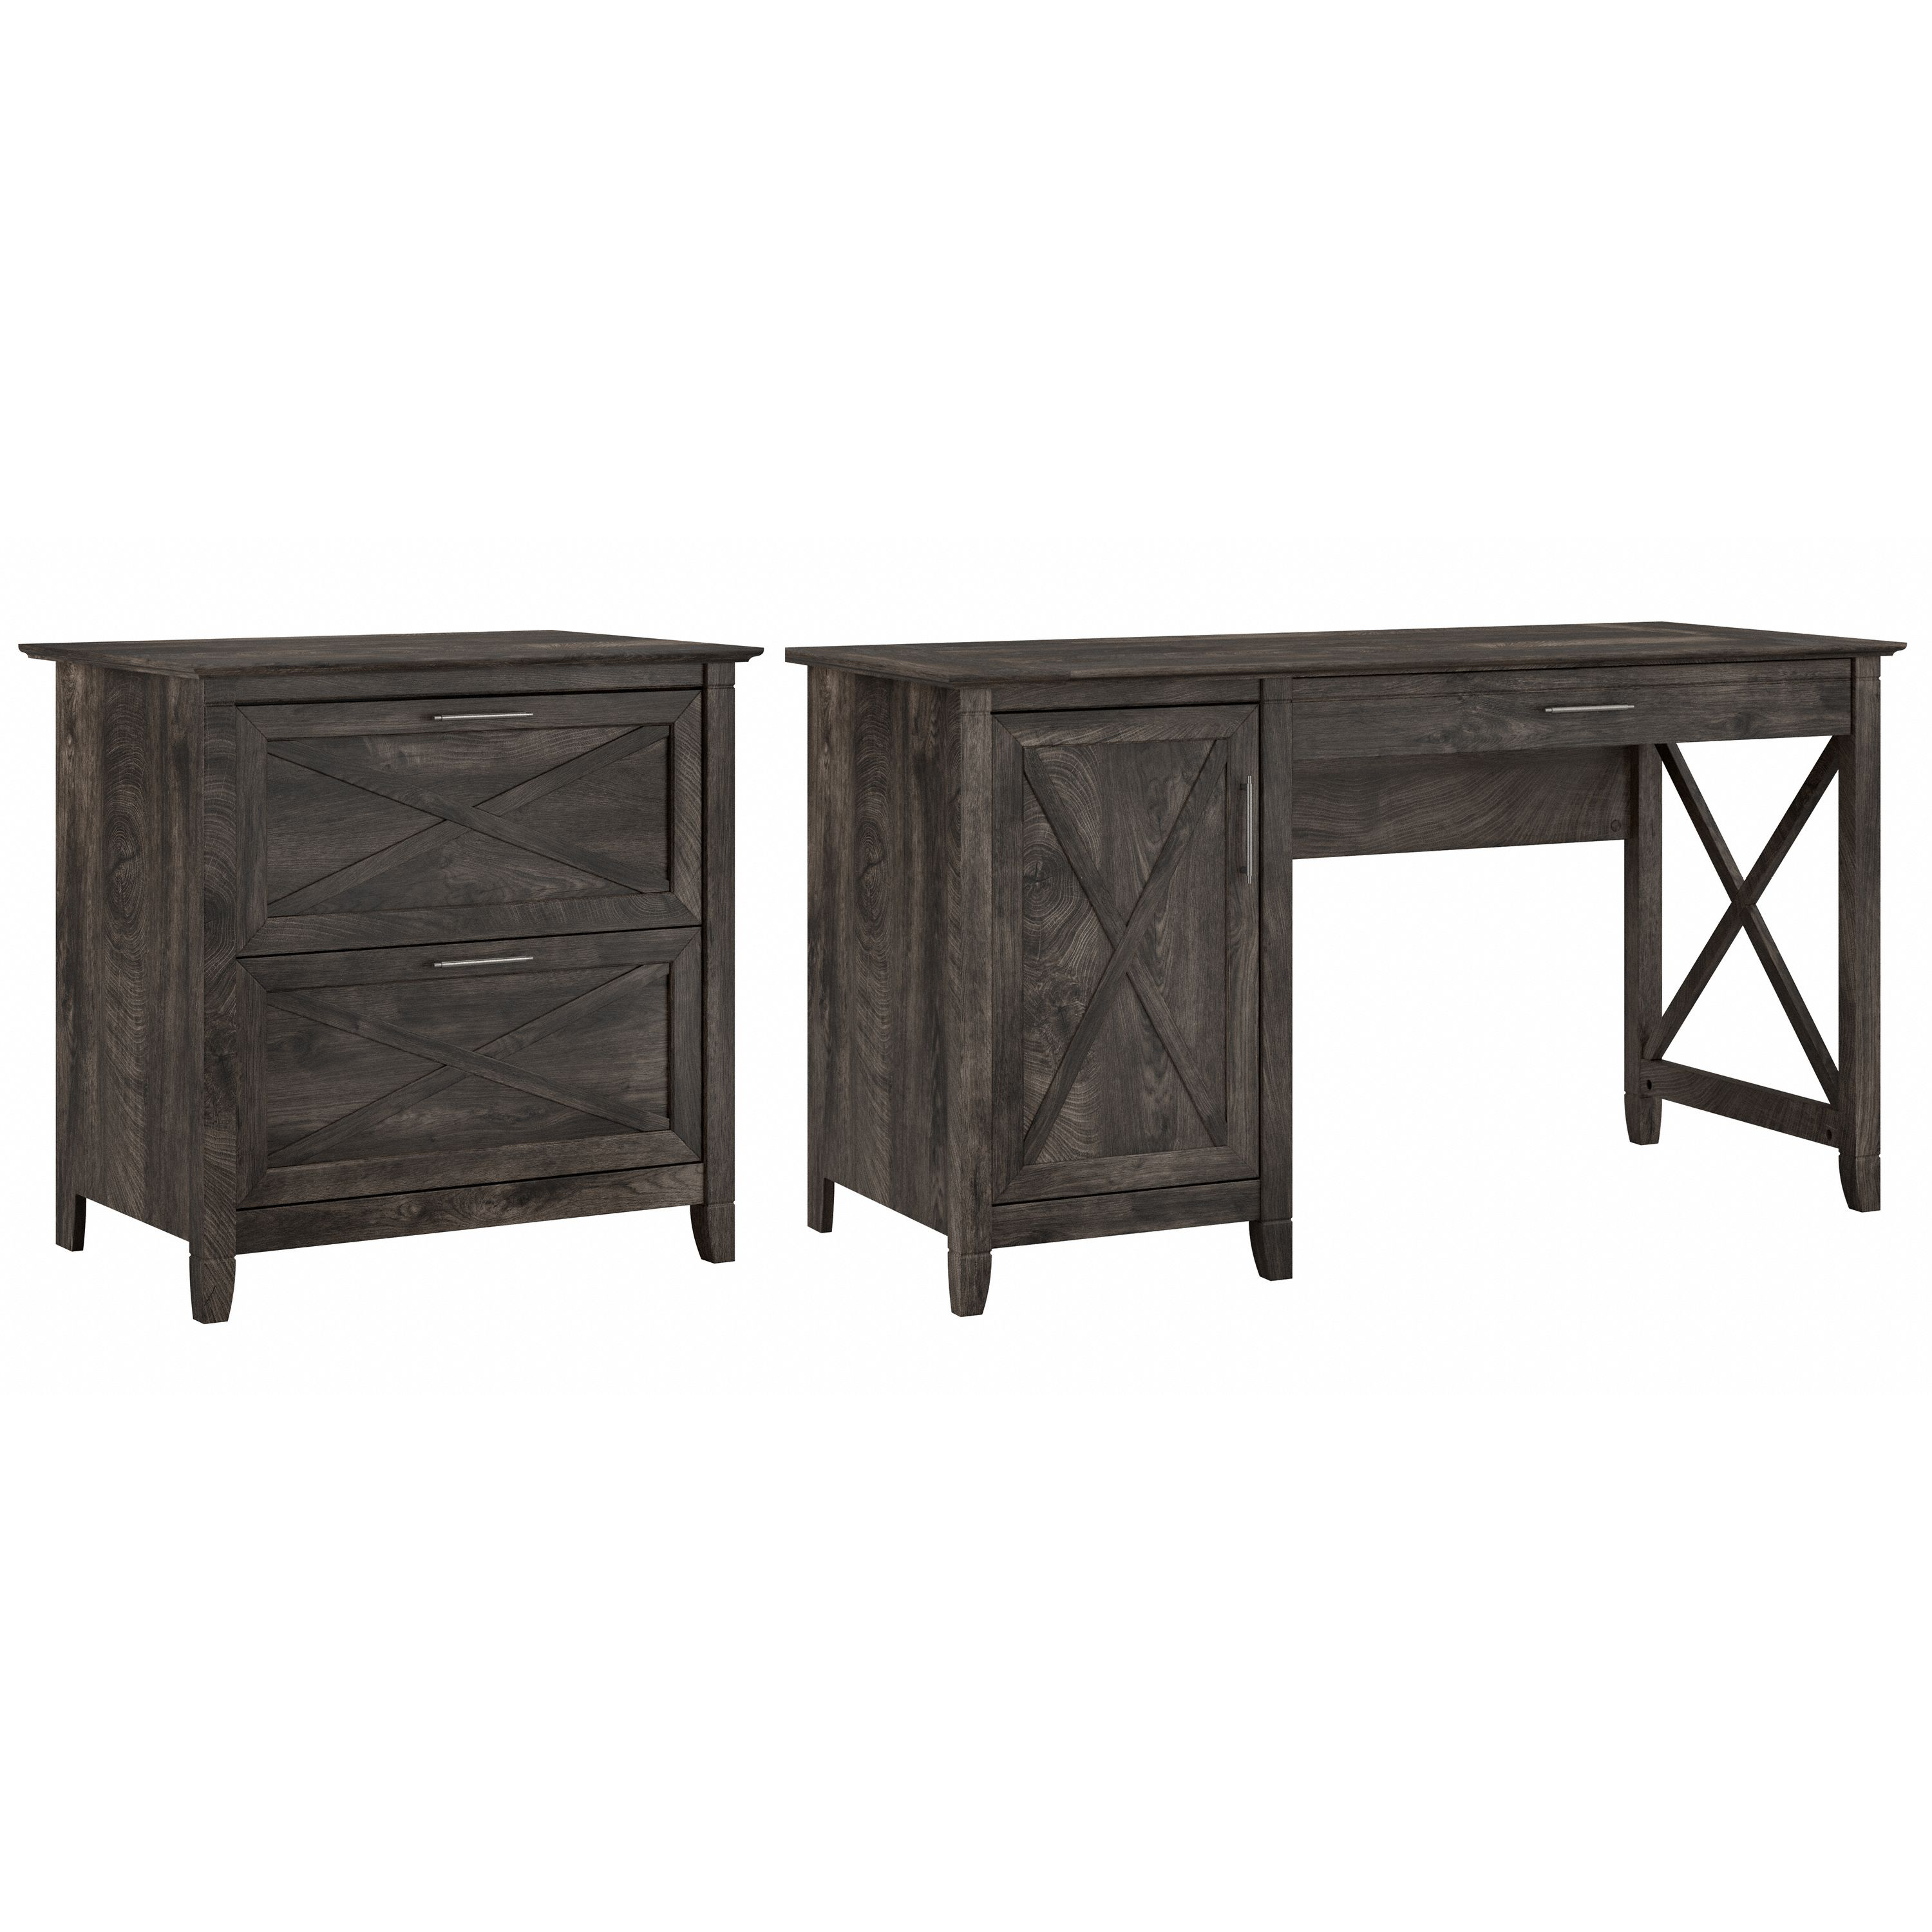 Shop Bush Furniture Key West 54W Computer Desk with Storage and 2 Drawer Lateral File Cabinet 02 KWS008GH #color_dark gray hickory